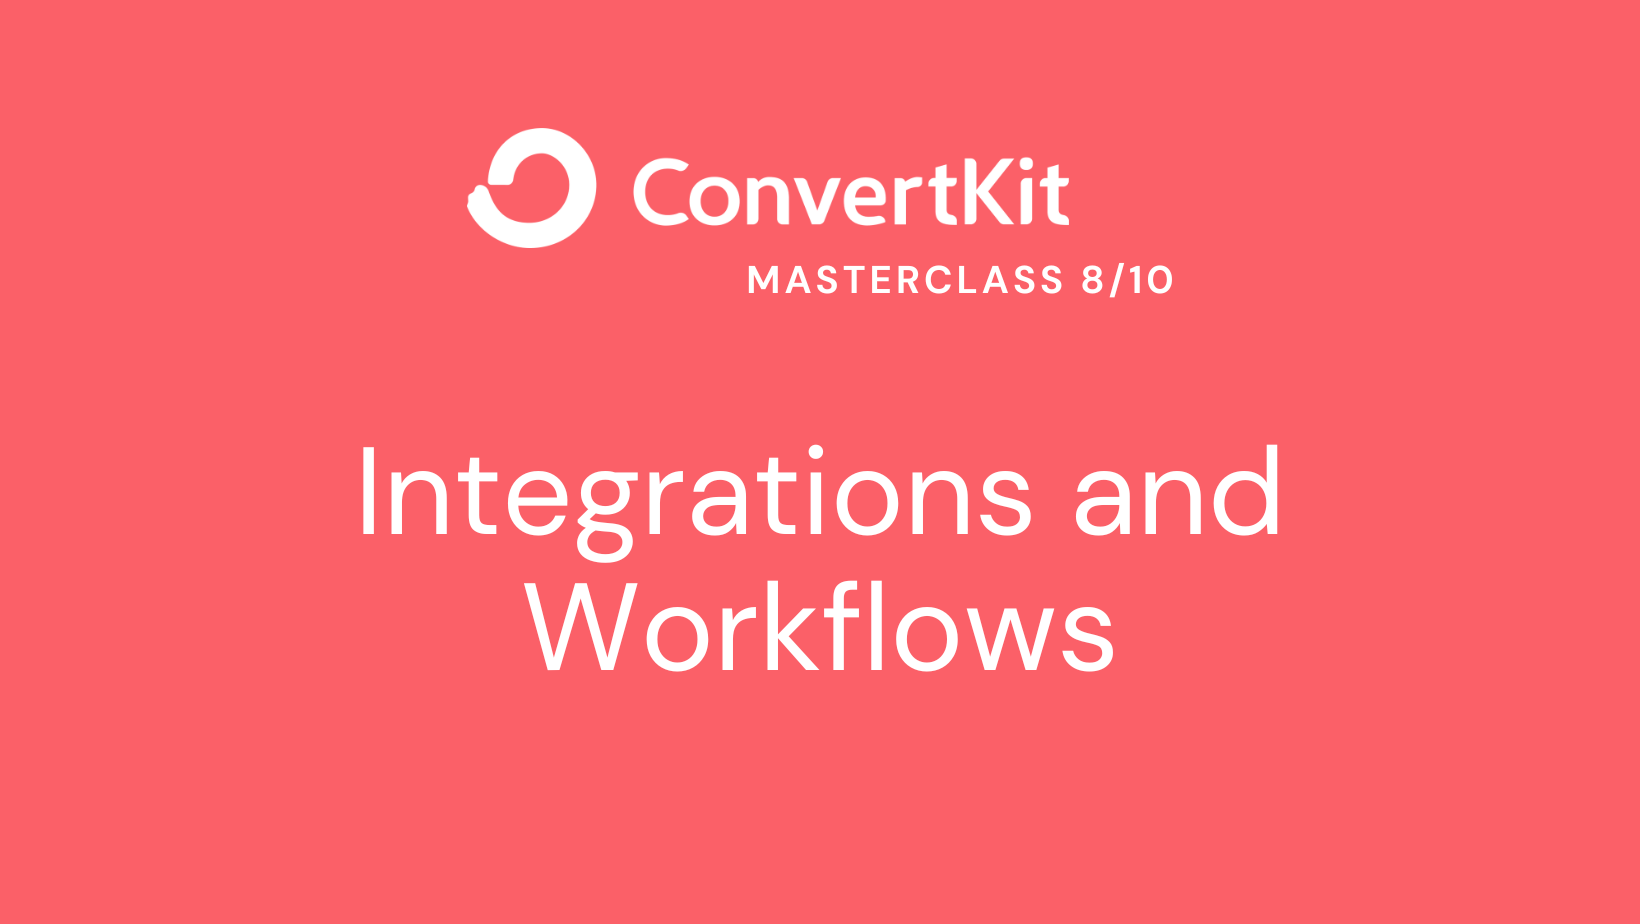 Advanced Convertkit Strategies: Integrations and Workflows